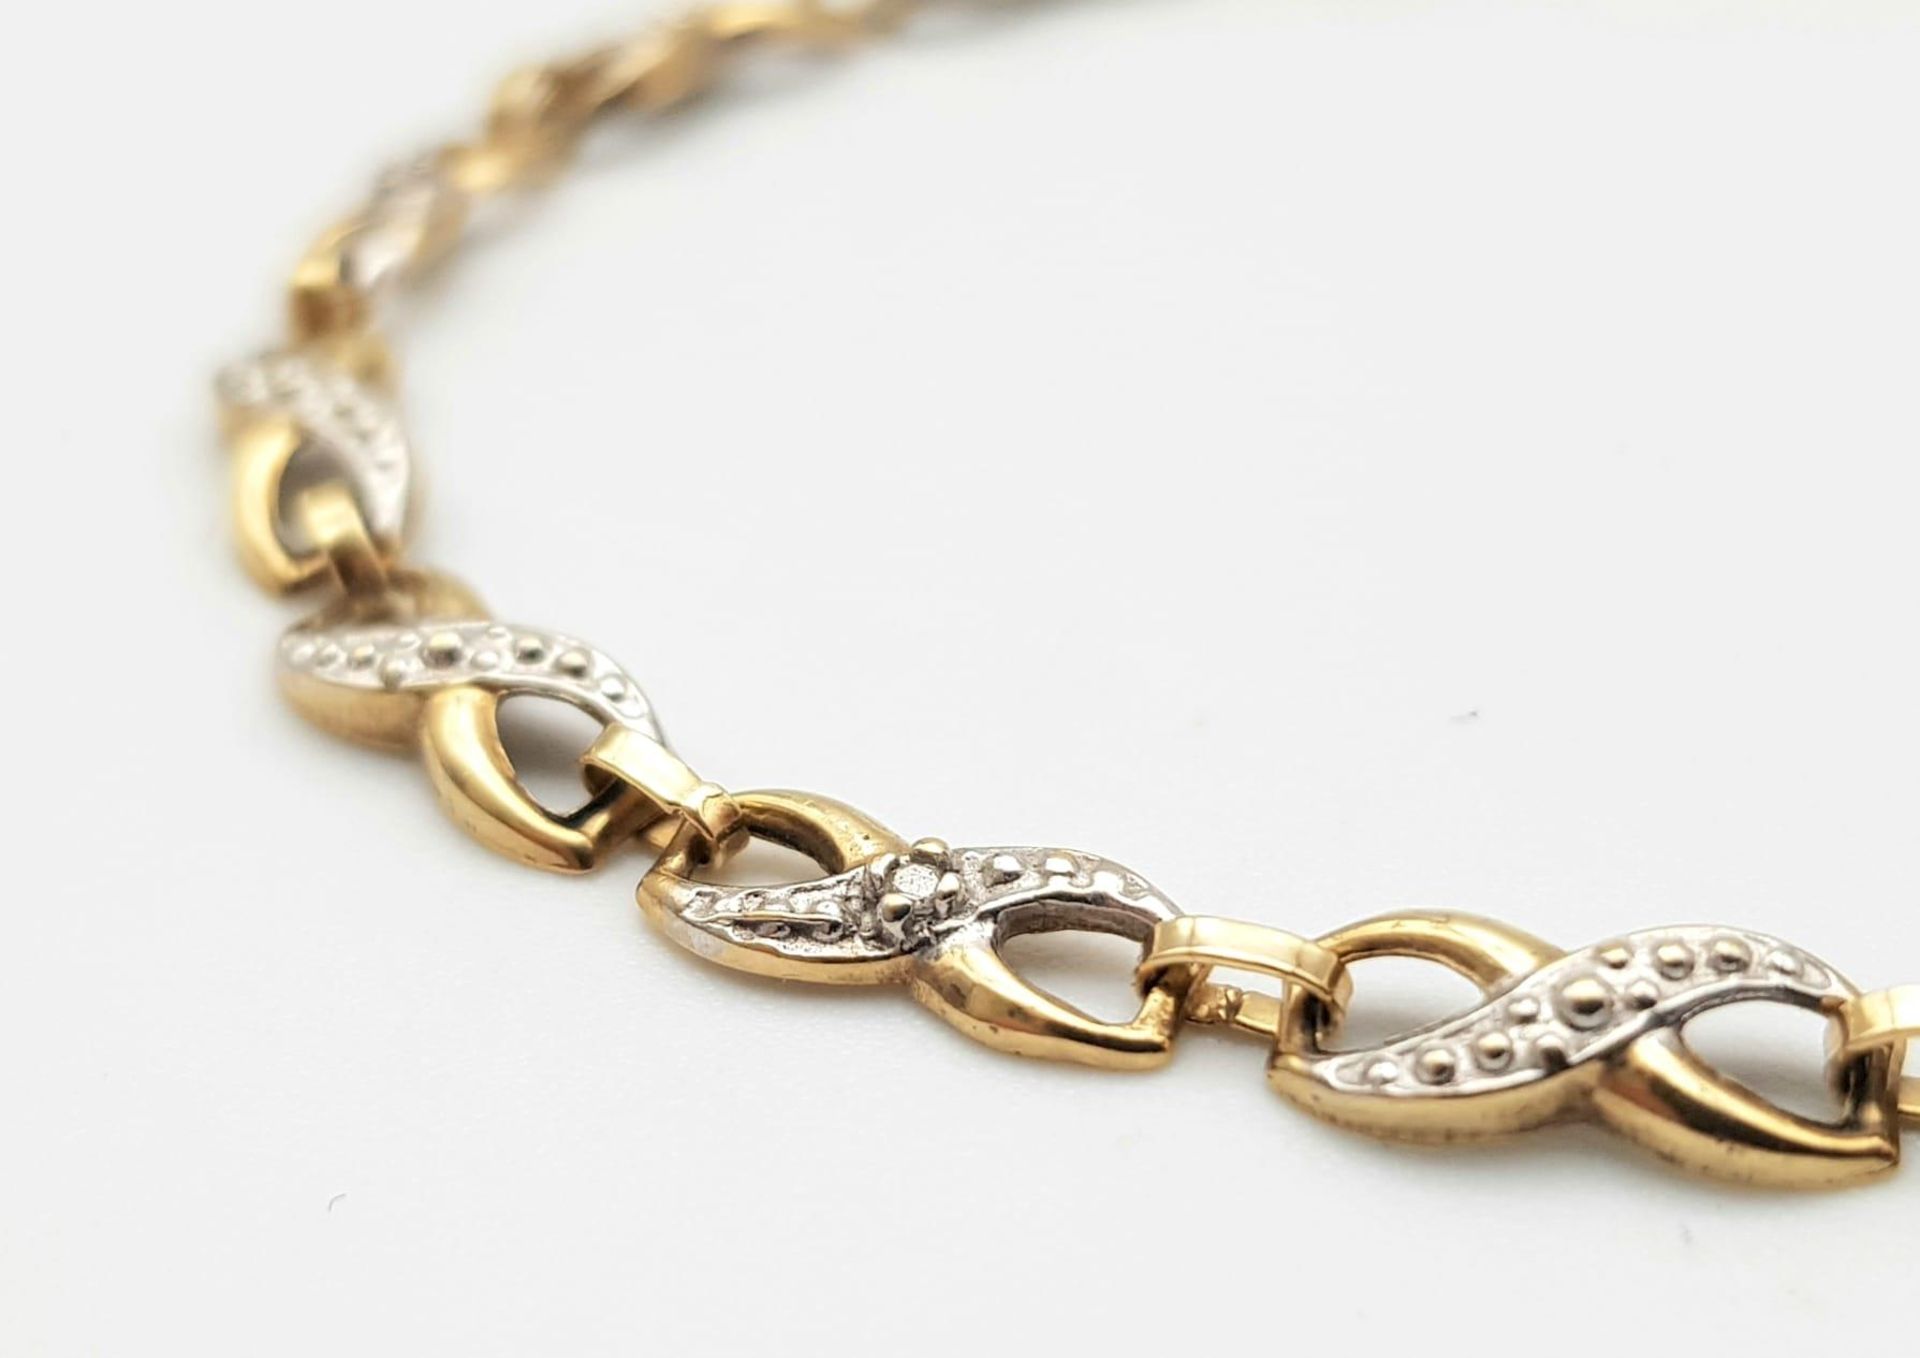 A Vintage 9K Yellow Gold and Diamond Spacer Crossover Link Bracelet. 18cm length. 2.37g total - Image 3 of 4